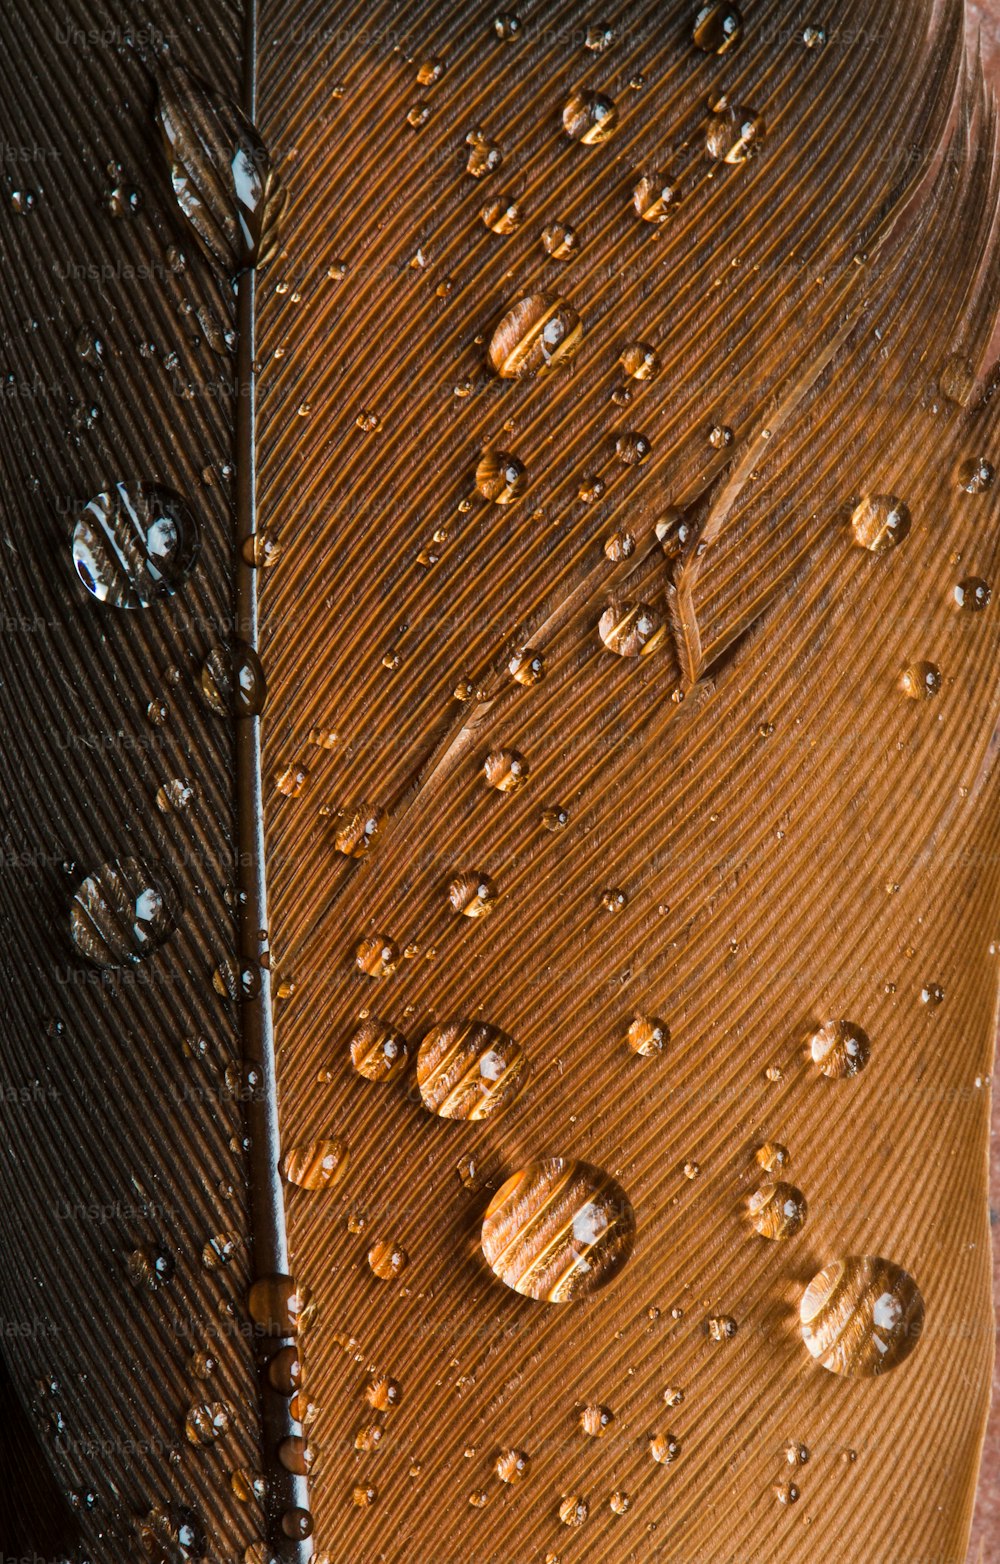 a close up of a tie with water drops on it